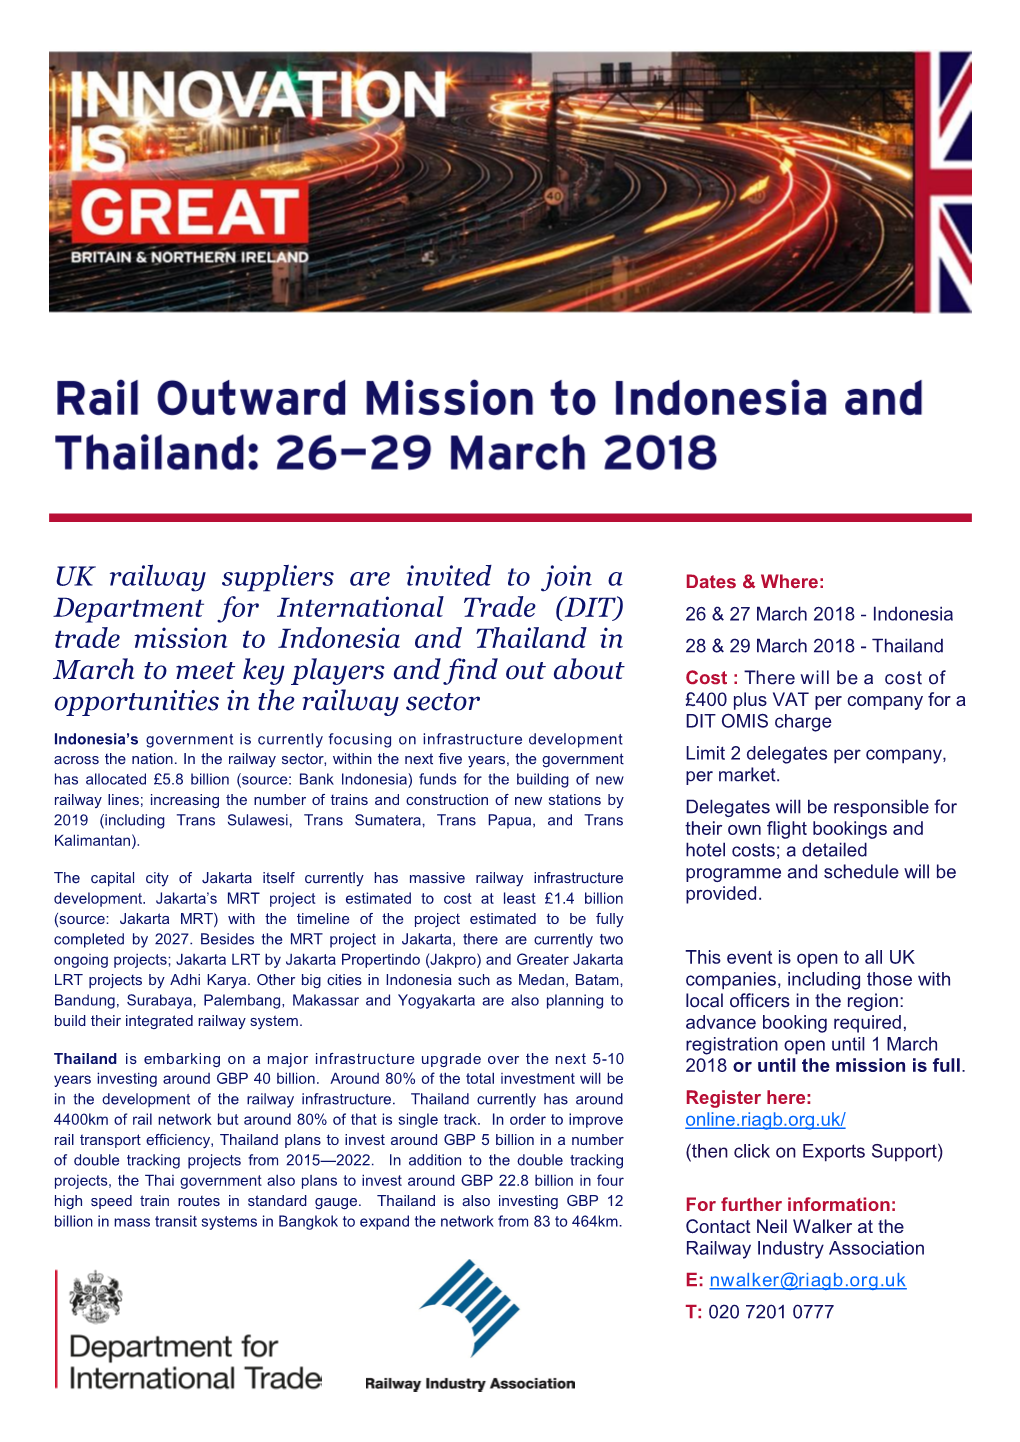 UK Railway Suppliers Are Invited to Join a Department for International